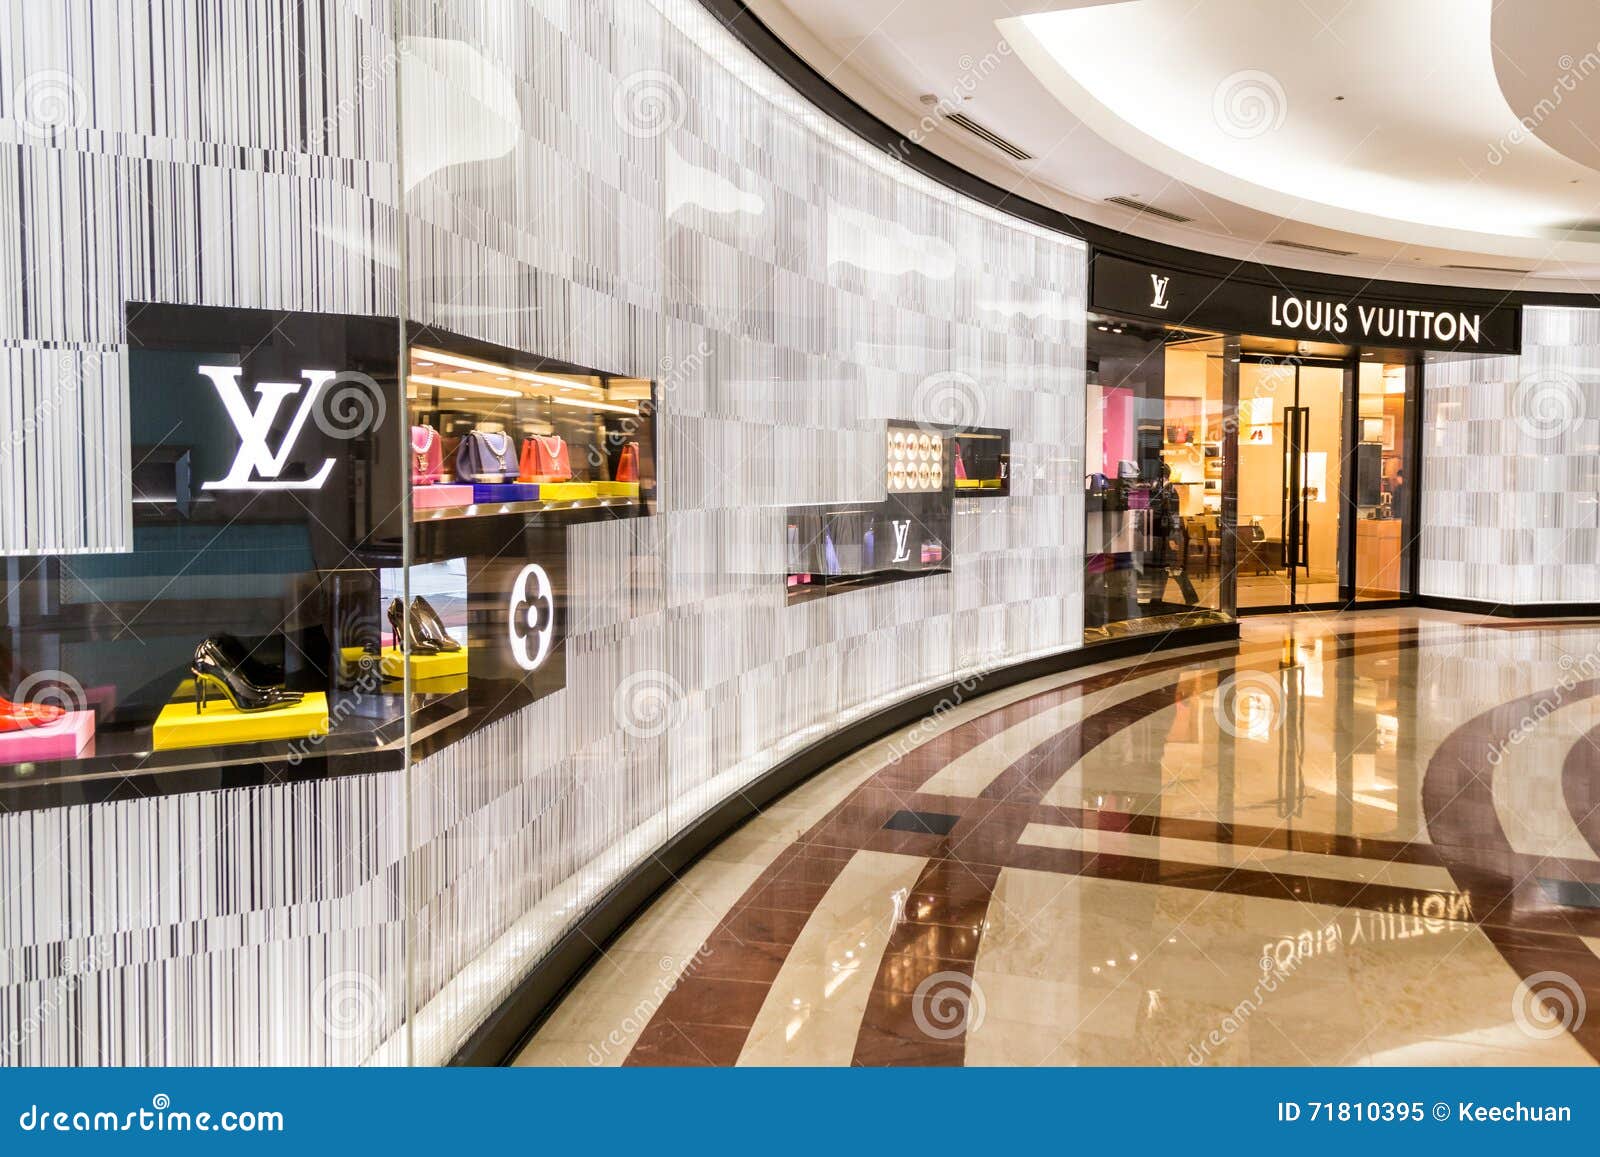 A Louis Vuitton LV Outlet At KLCC Kuala Lumpur Editorial Image - Image of shop, brand: 71810395